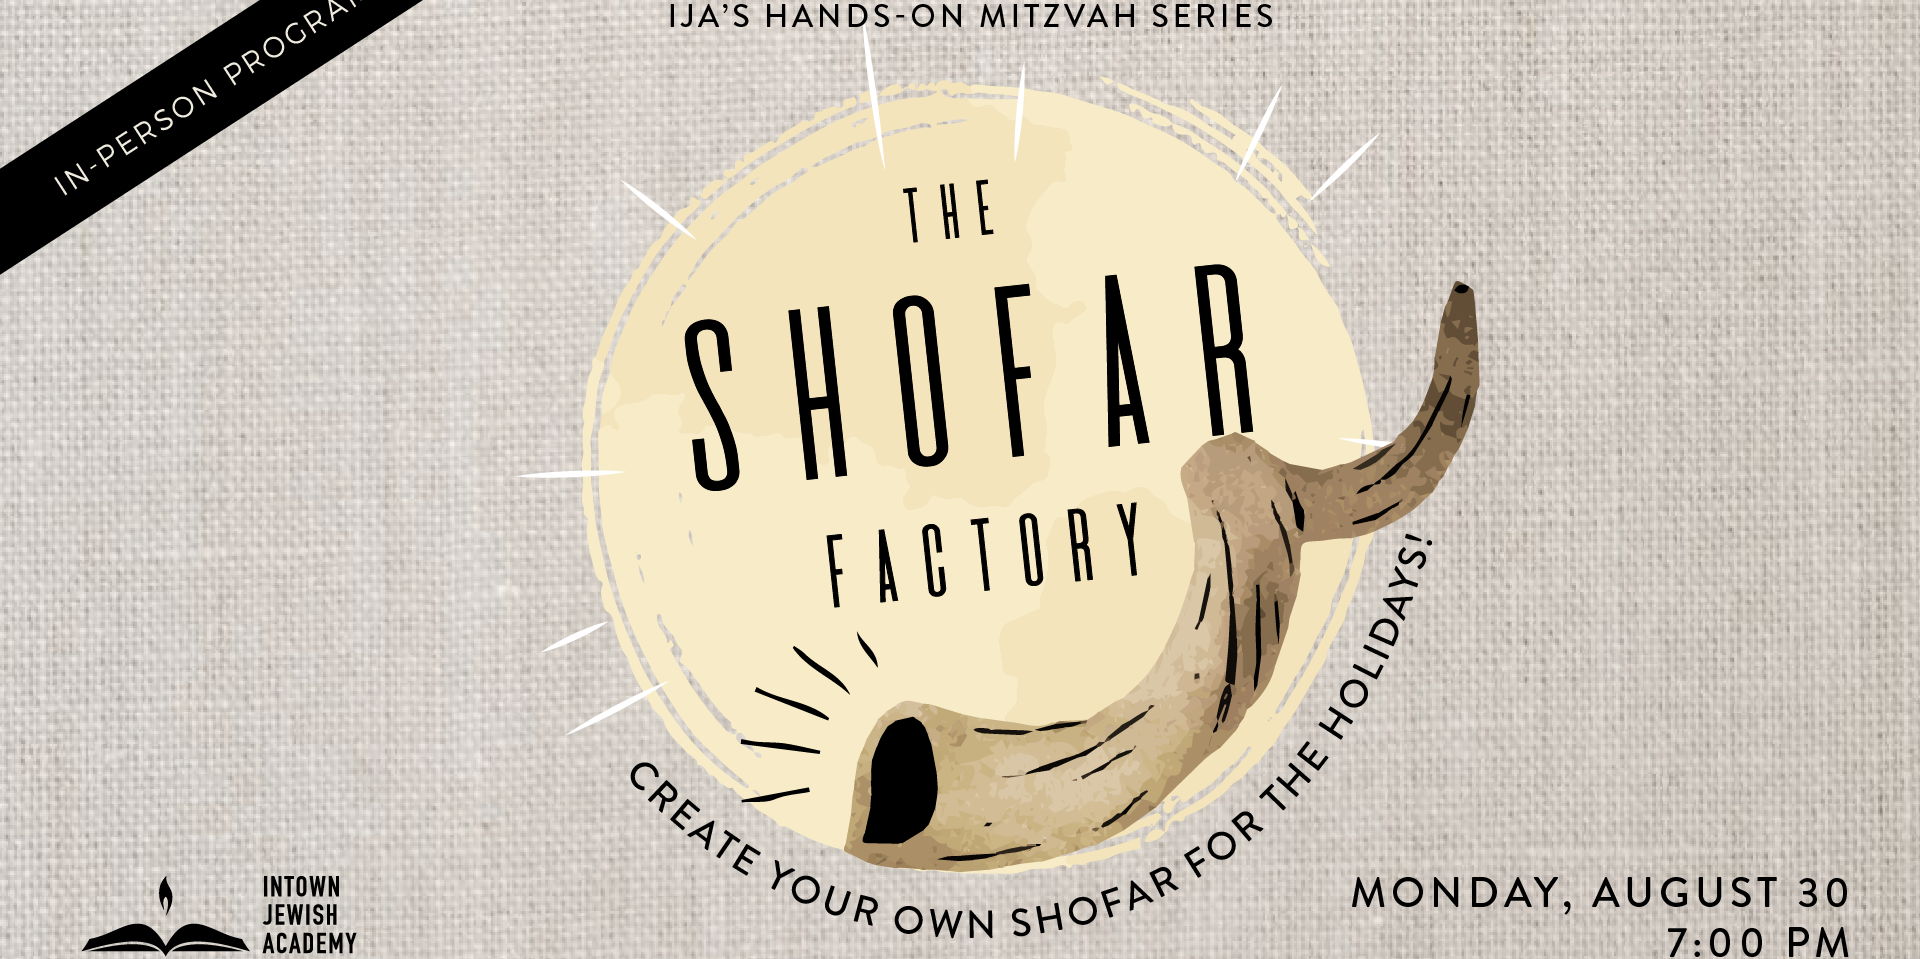 The Shofar Factory promotional image